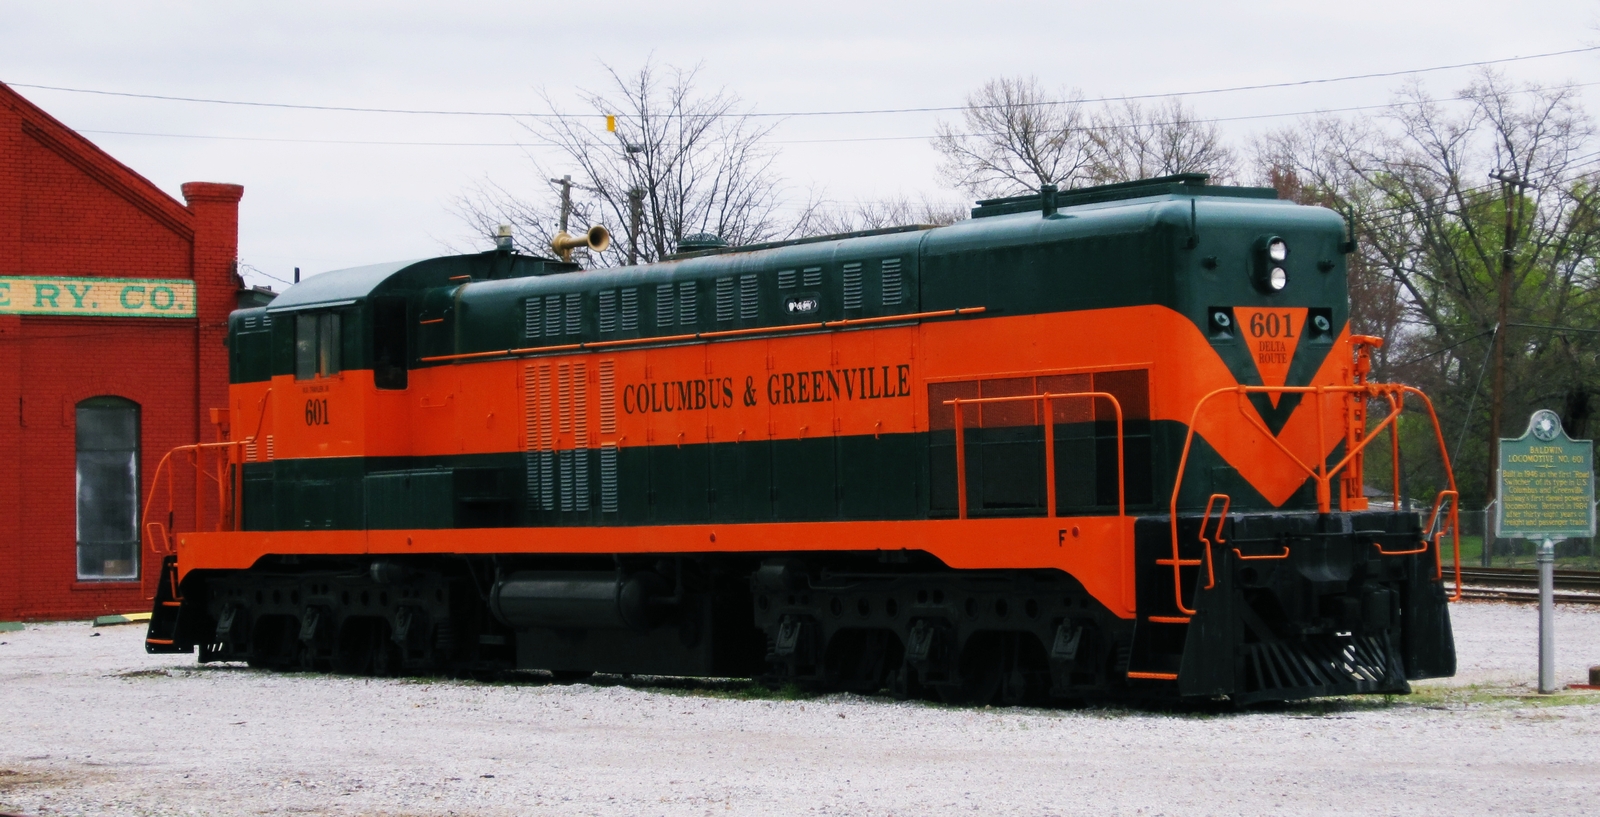 DRS-6-4-1500 of the Columbus and Greenville Railroad in March 2011 in Columbus, Missouri